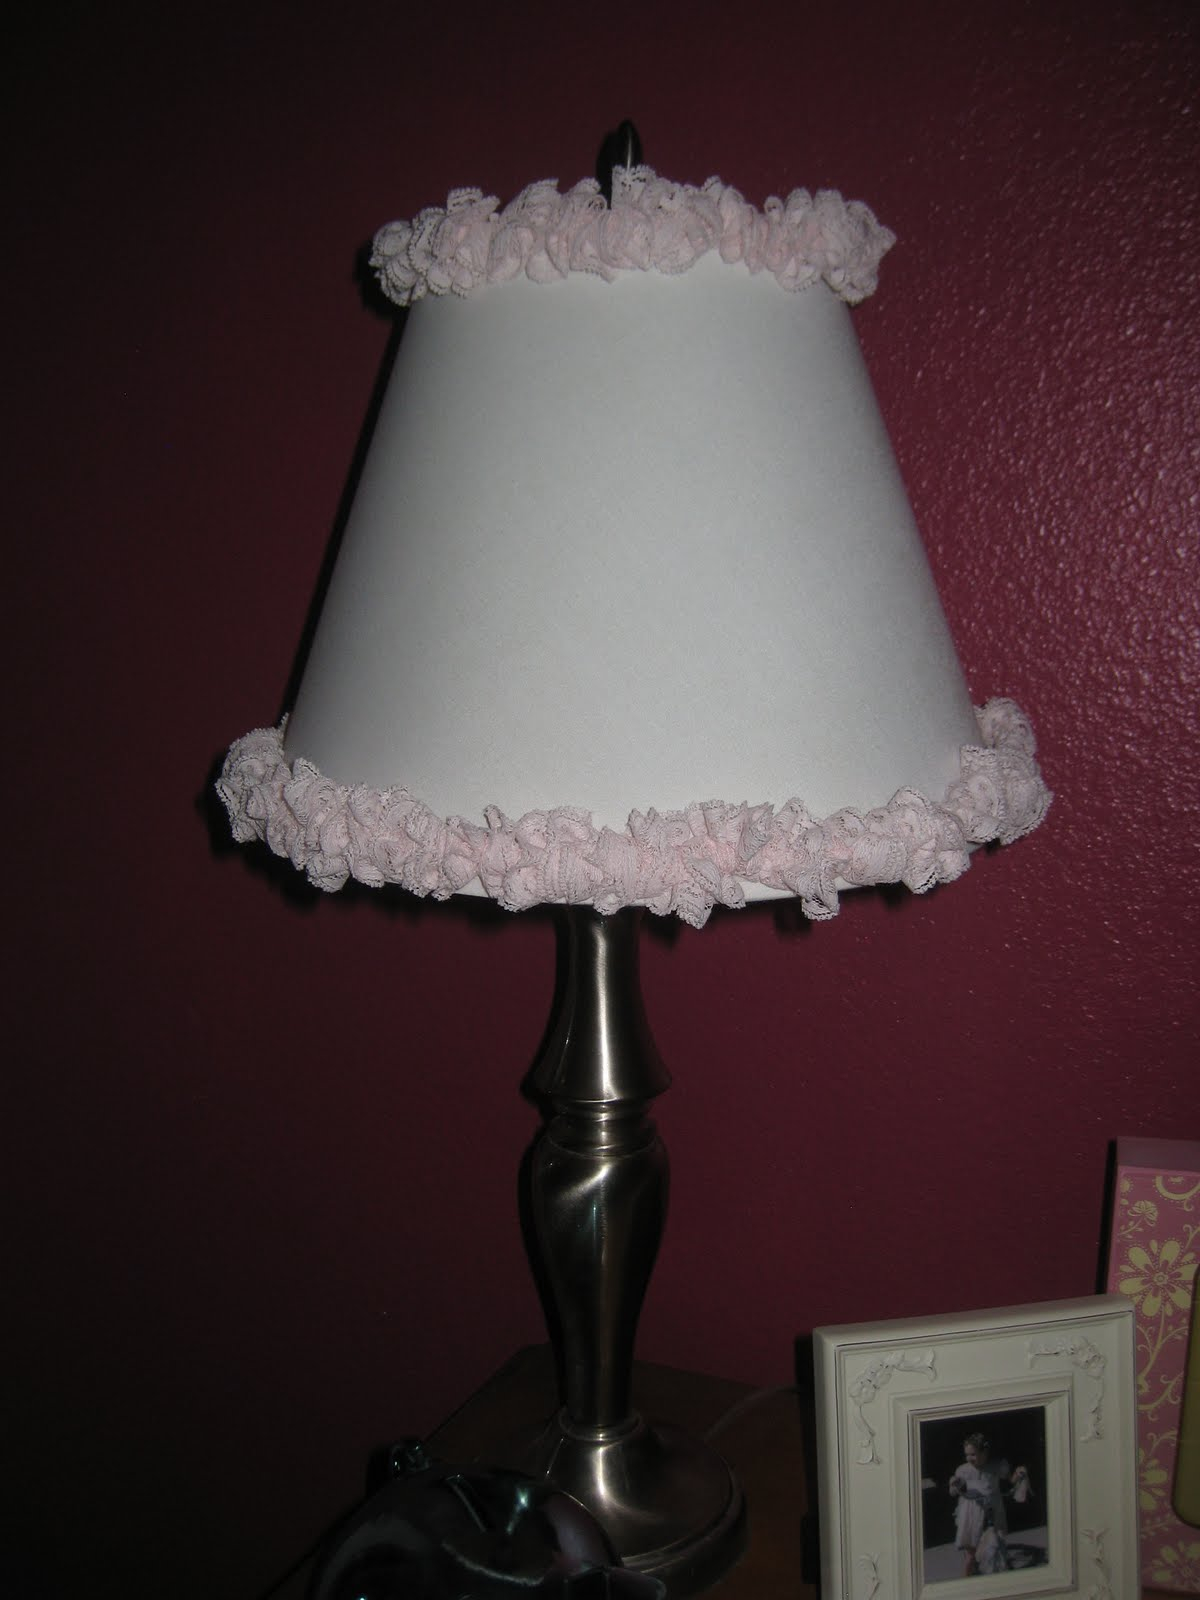 The Princess And Pea Girly Lamp Floor Lamps Add Feathers in size 1200 X 1600